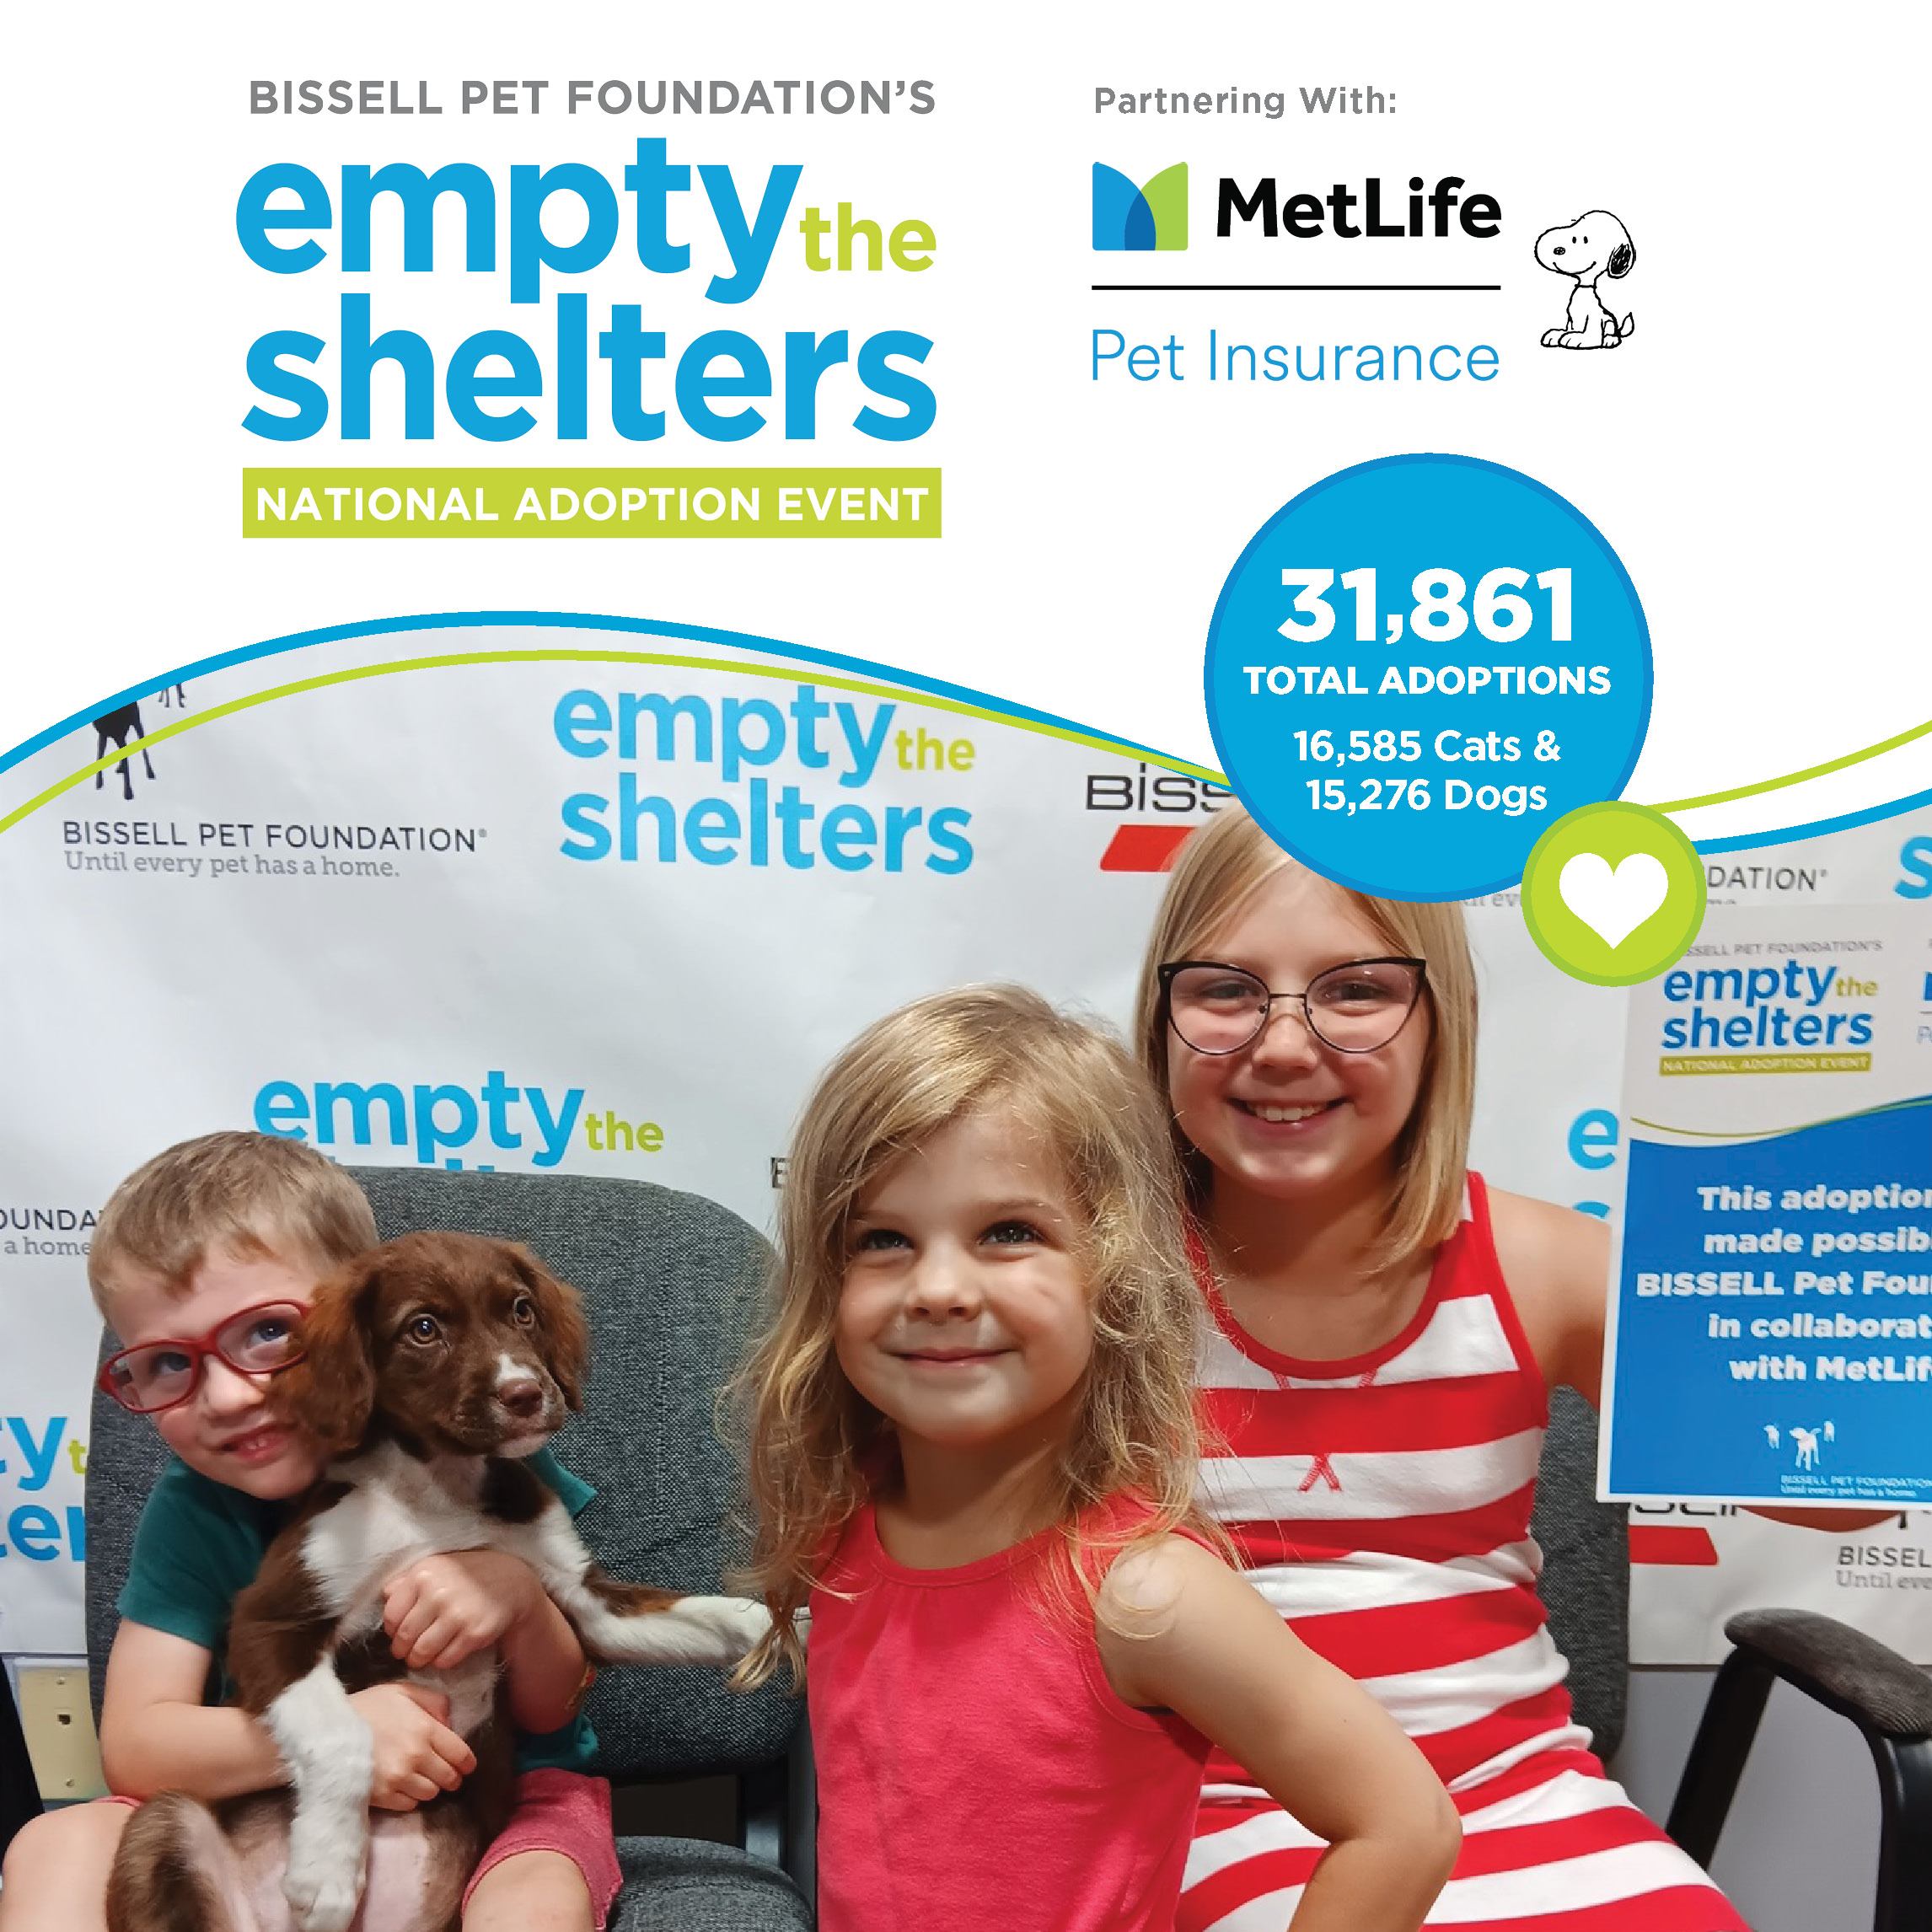 31,861 Total Adoptions at BISSELL Pet Foundation's Summer National Empty the Shelters